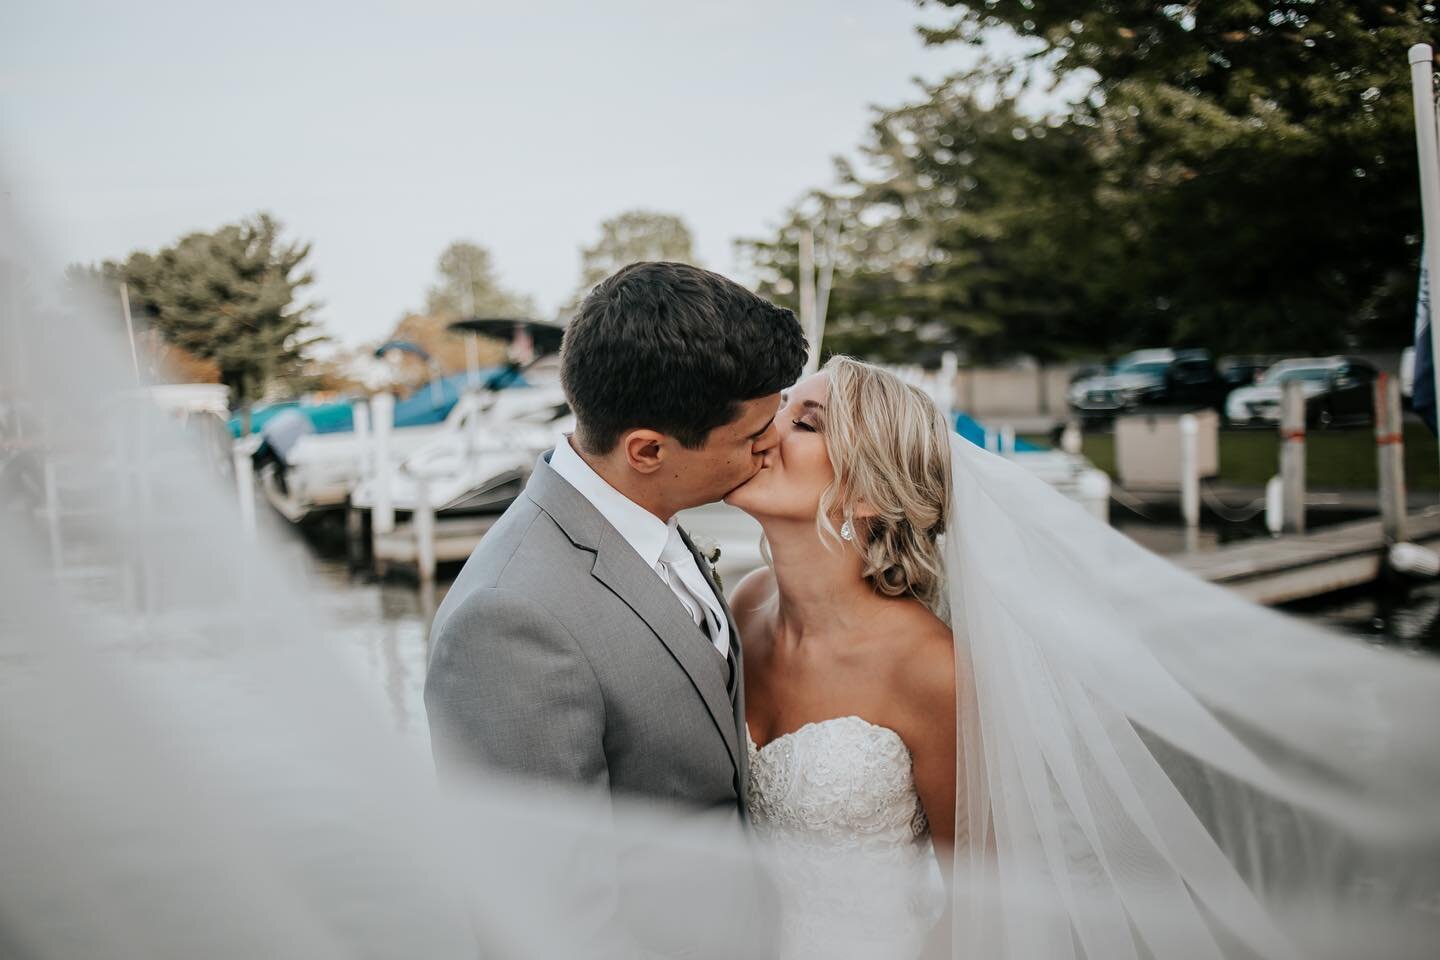 Veil details are my favorite🤩